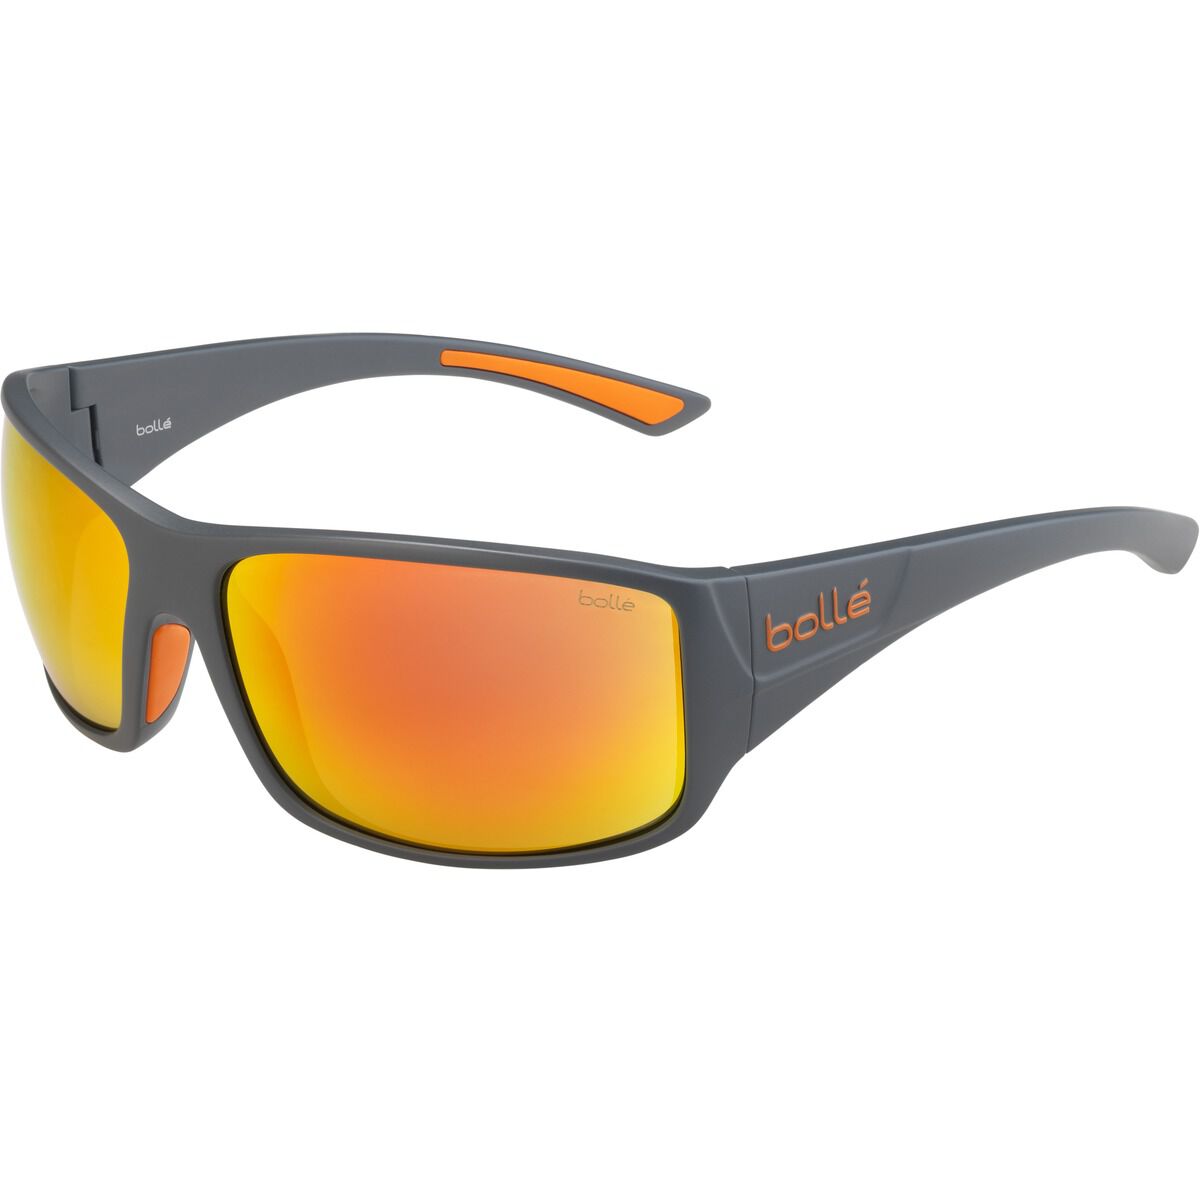 Bolle Tigersnake Sunglasses  Cool Grey Matte One Size